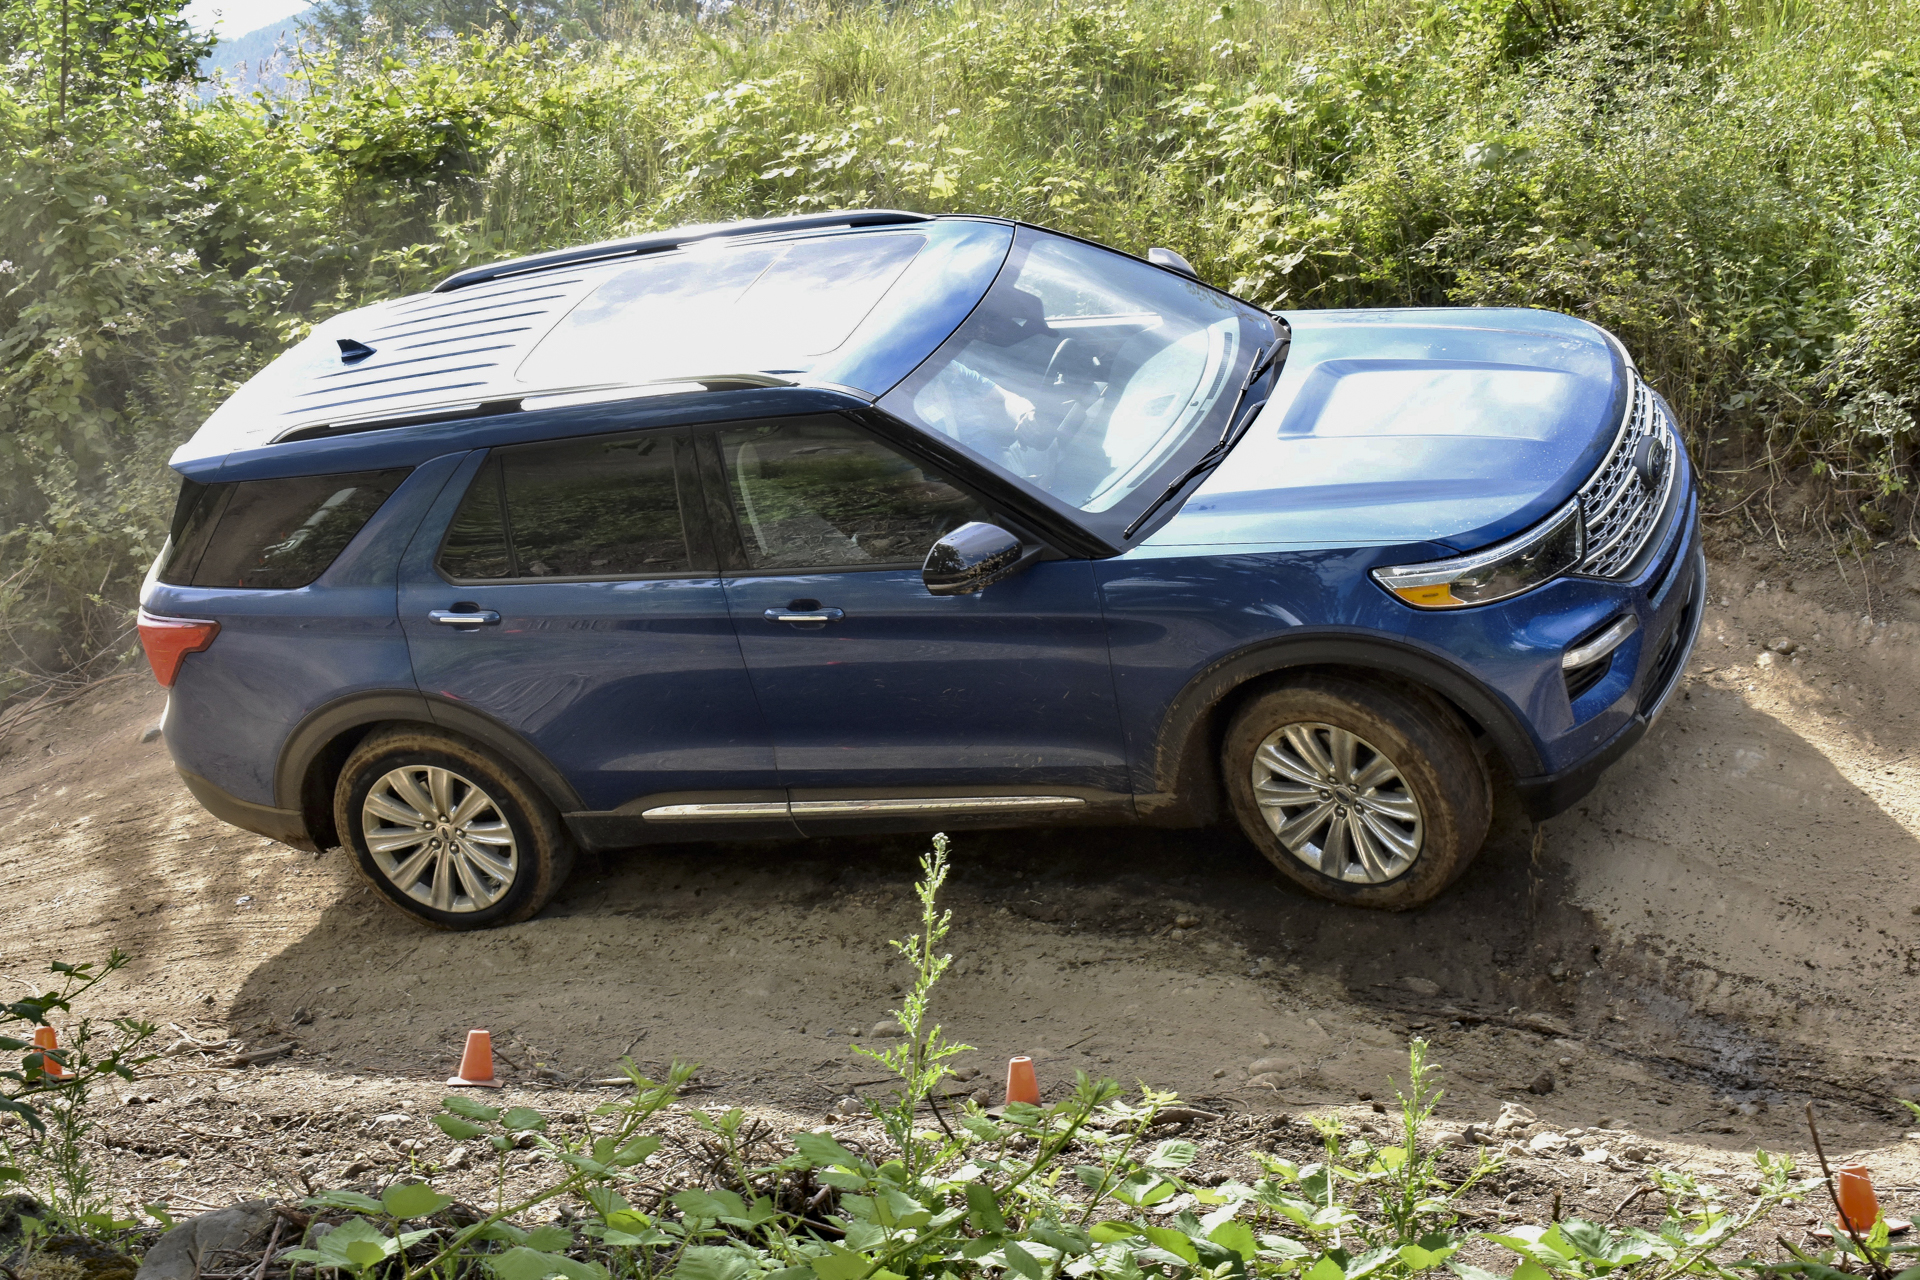 2020 Ford Explorer First Drive Review: Don't Judge A Book By Its Cover |  Digital Trends